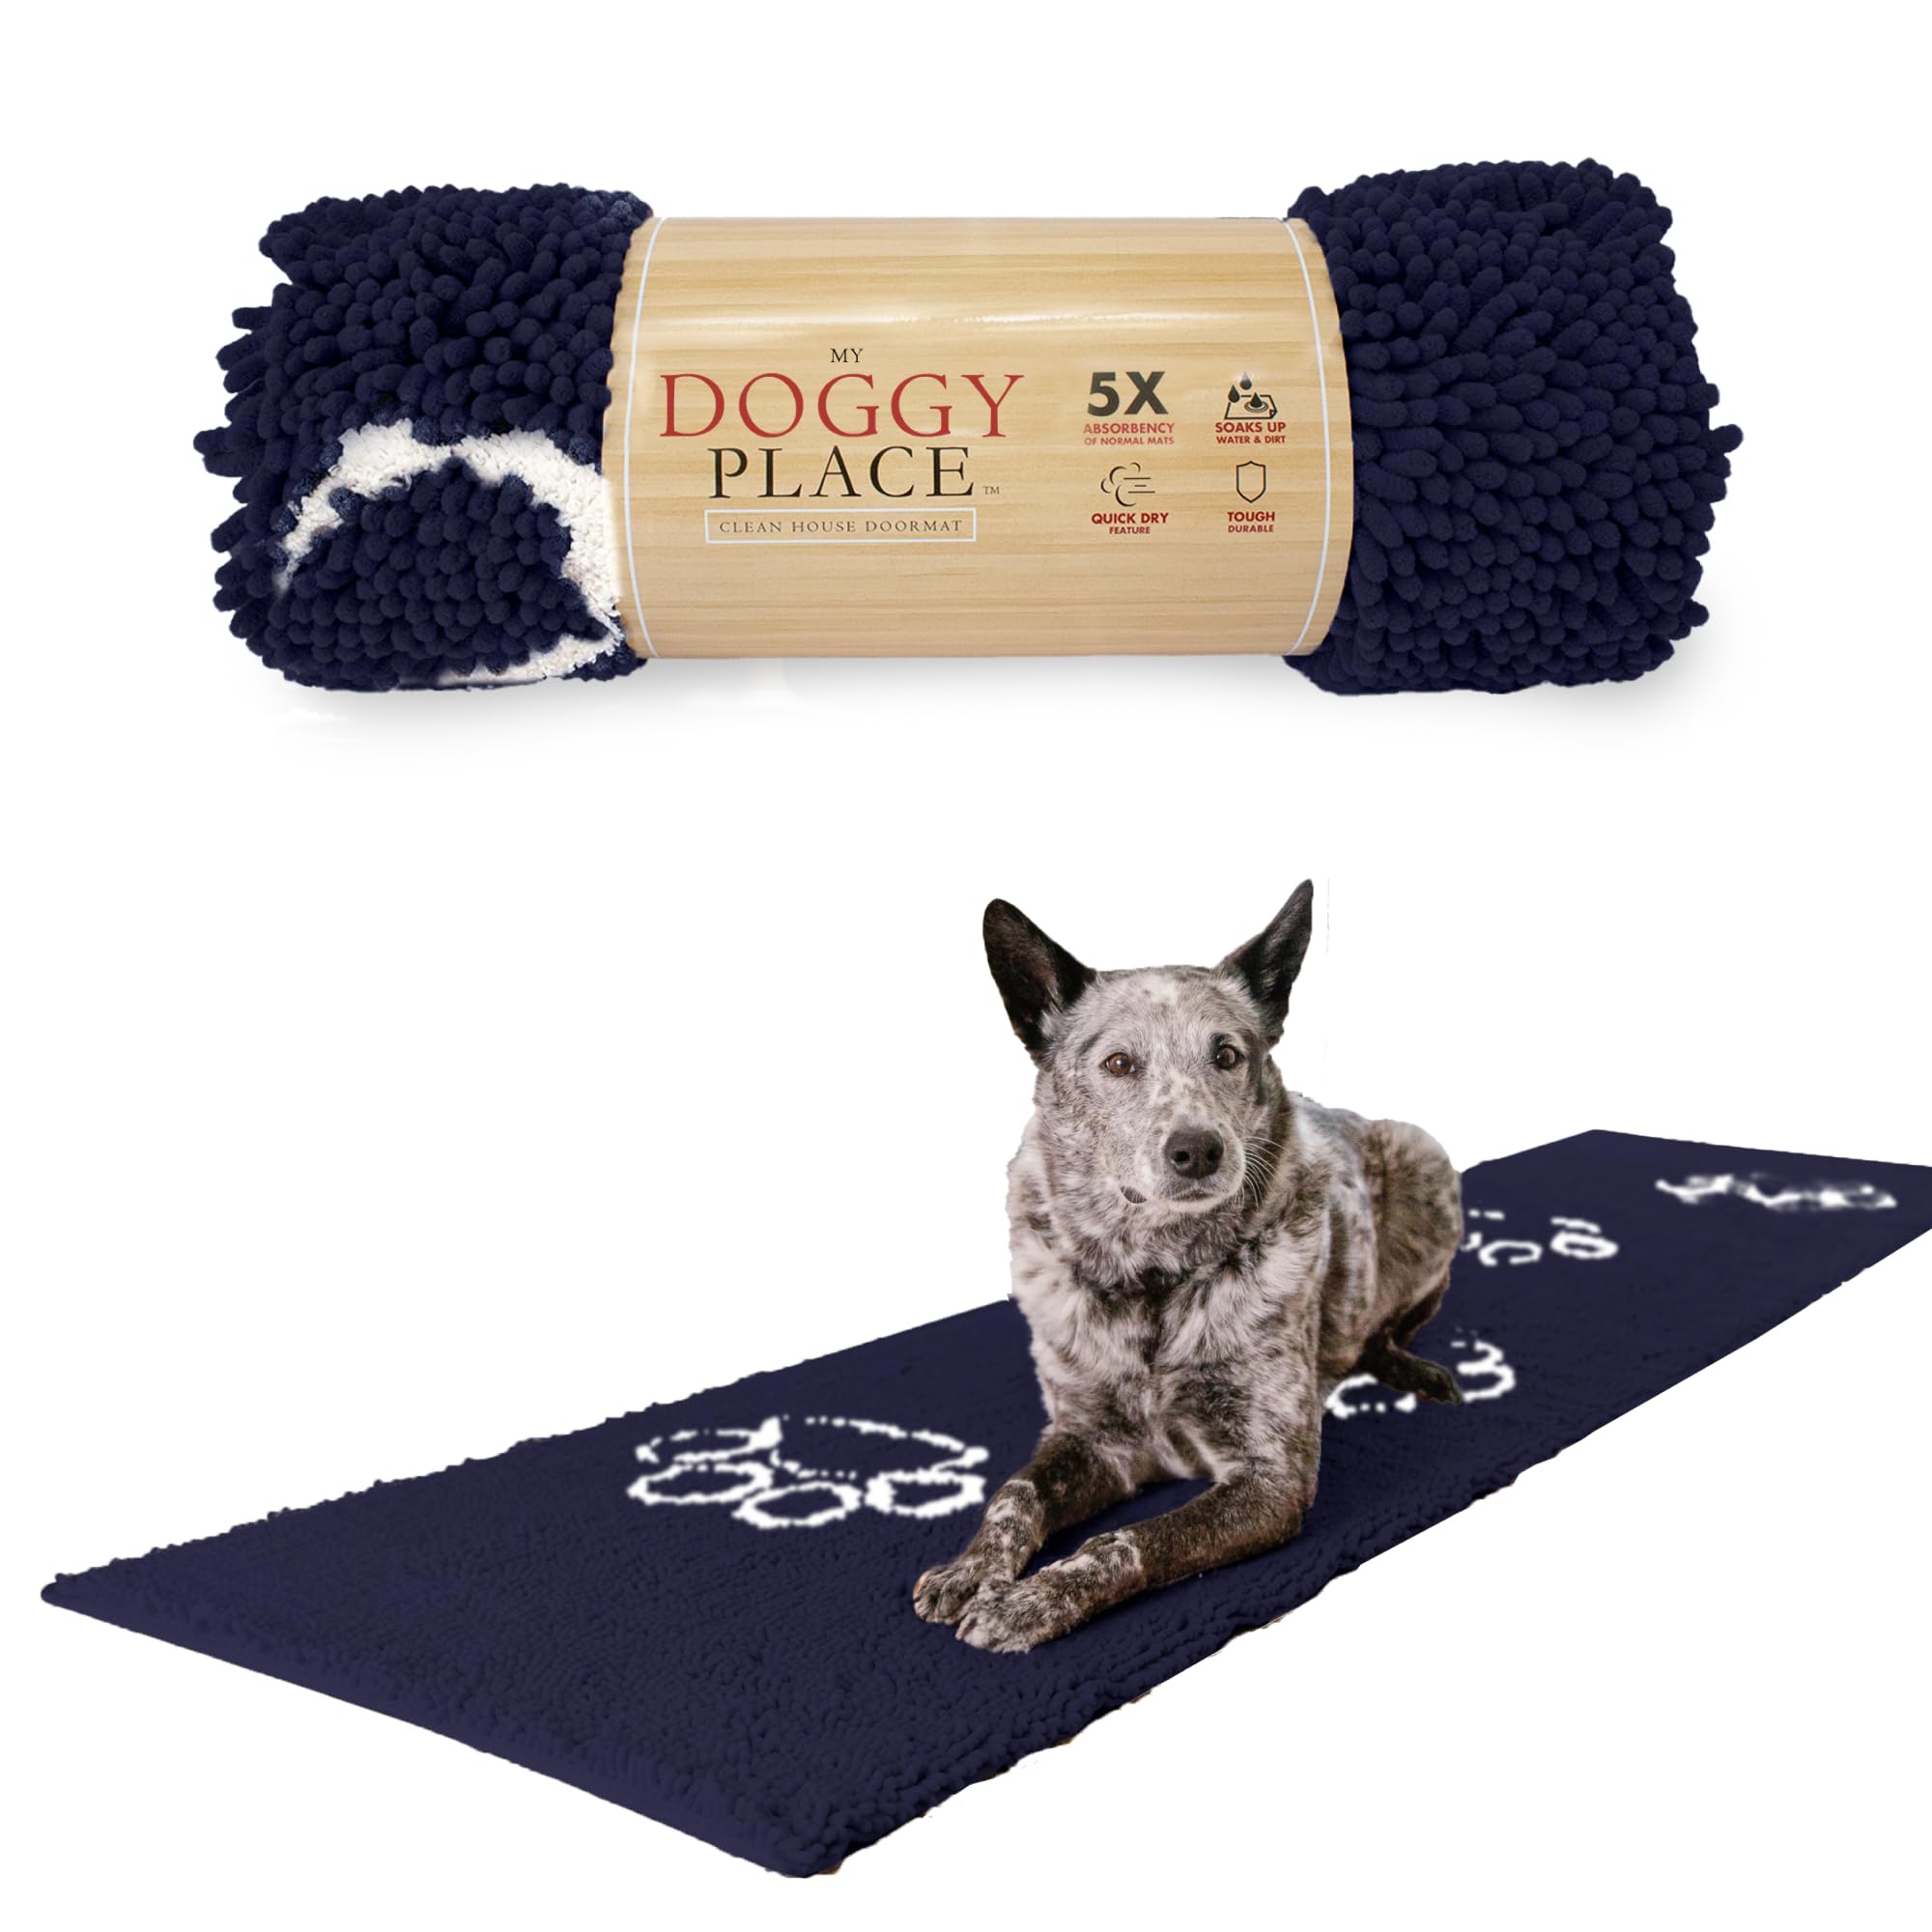 My Doggy Place Microfiber Dog Mat for Muddy Paws, 8 x 2 Navy Blue with Paw Print - Non-Slip, Absorbent and Quick-Drying Dog Paw